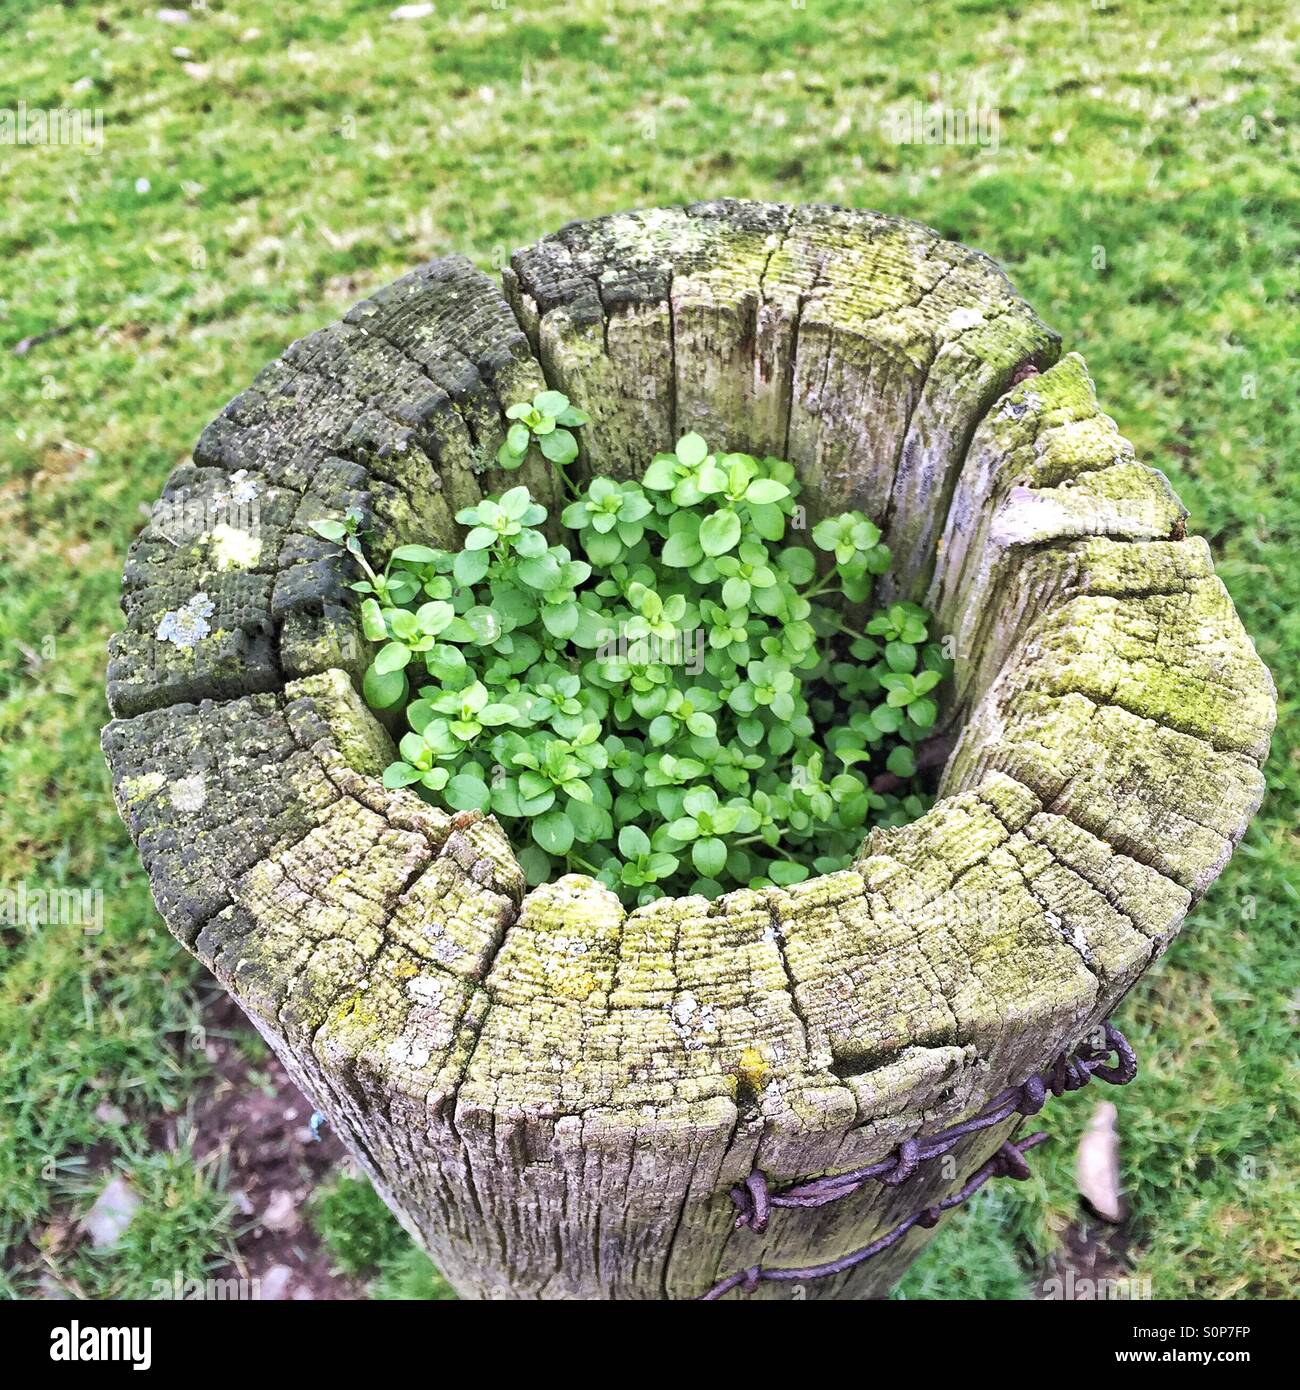 Life in death - new plant growing in old post Stock Photo